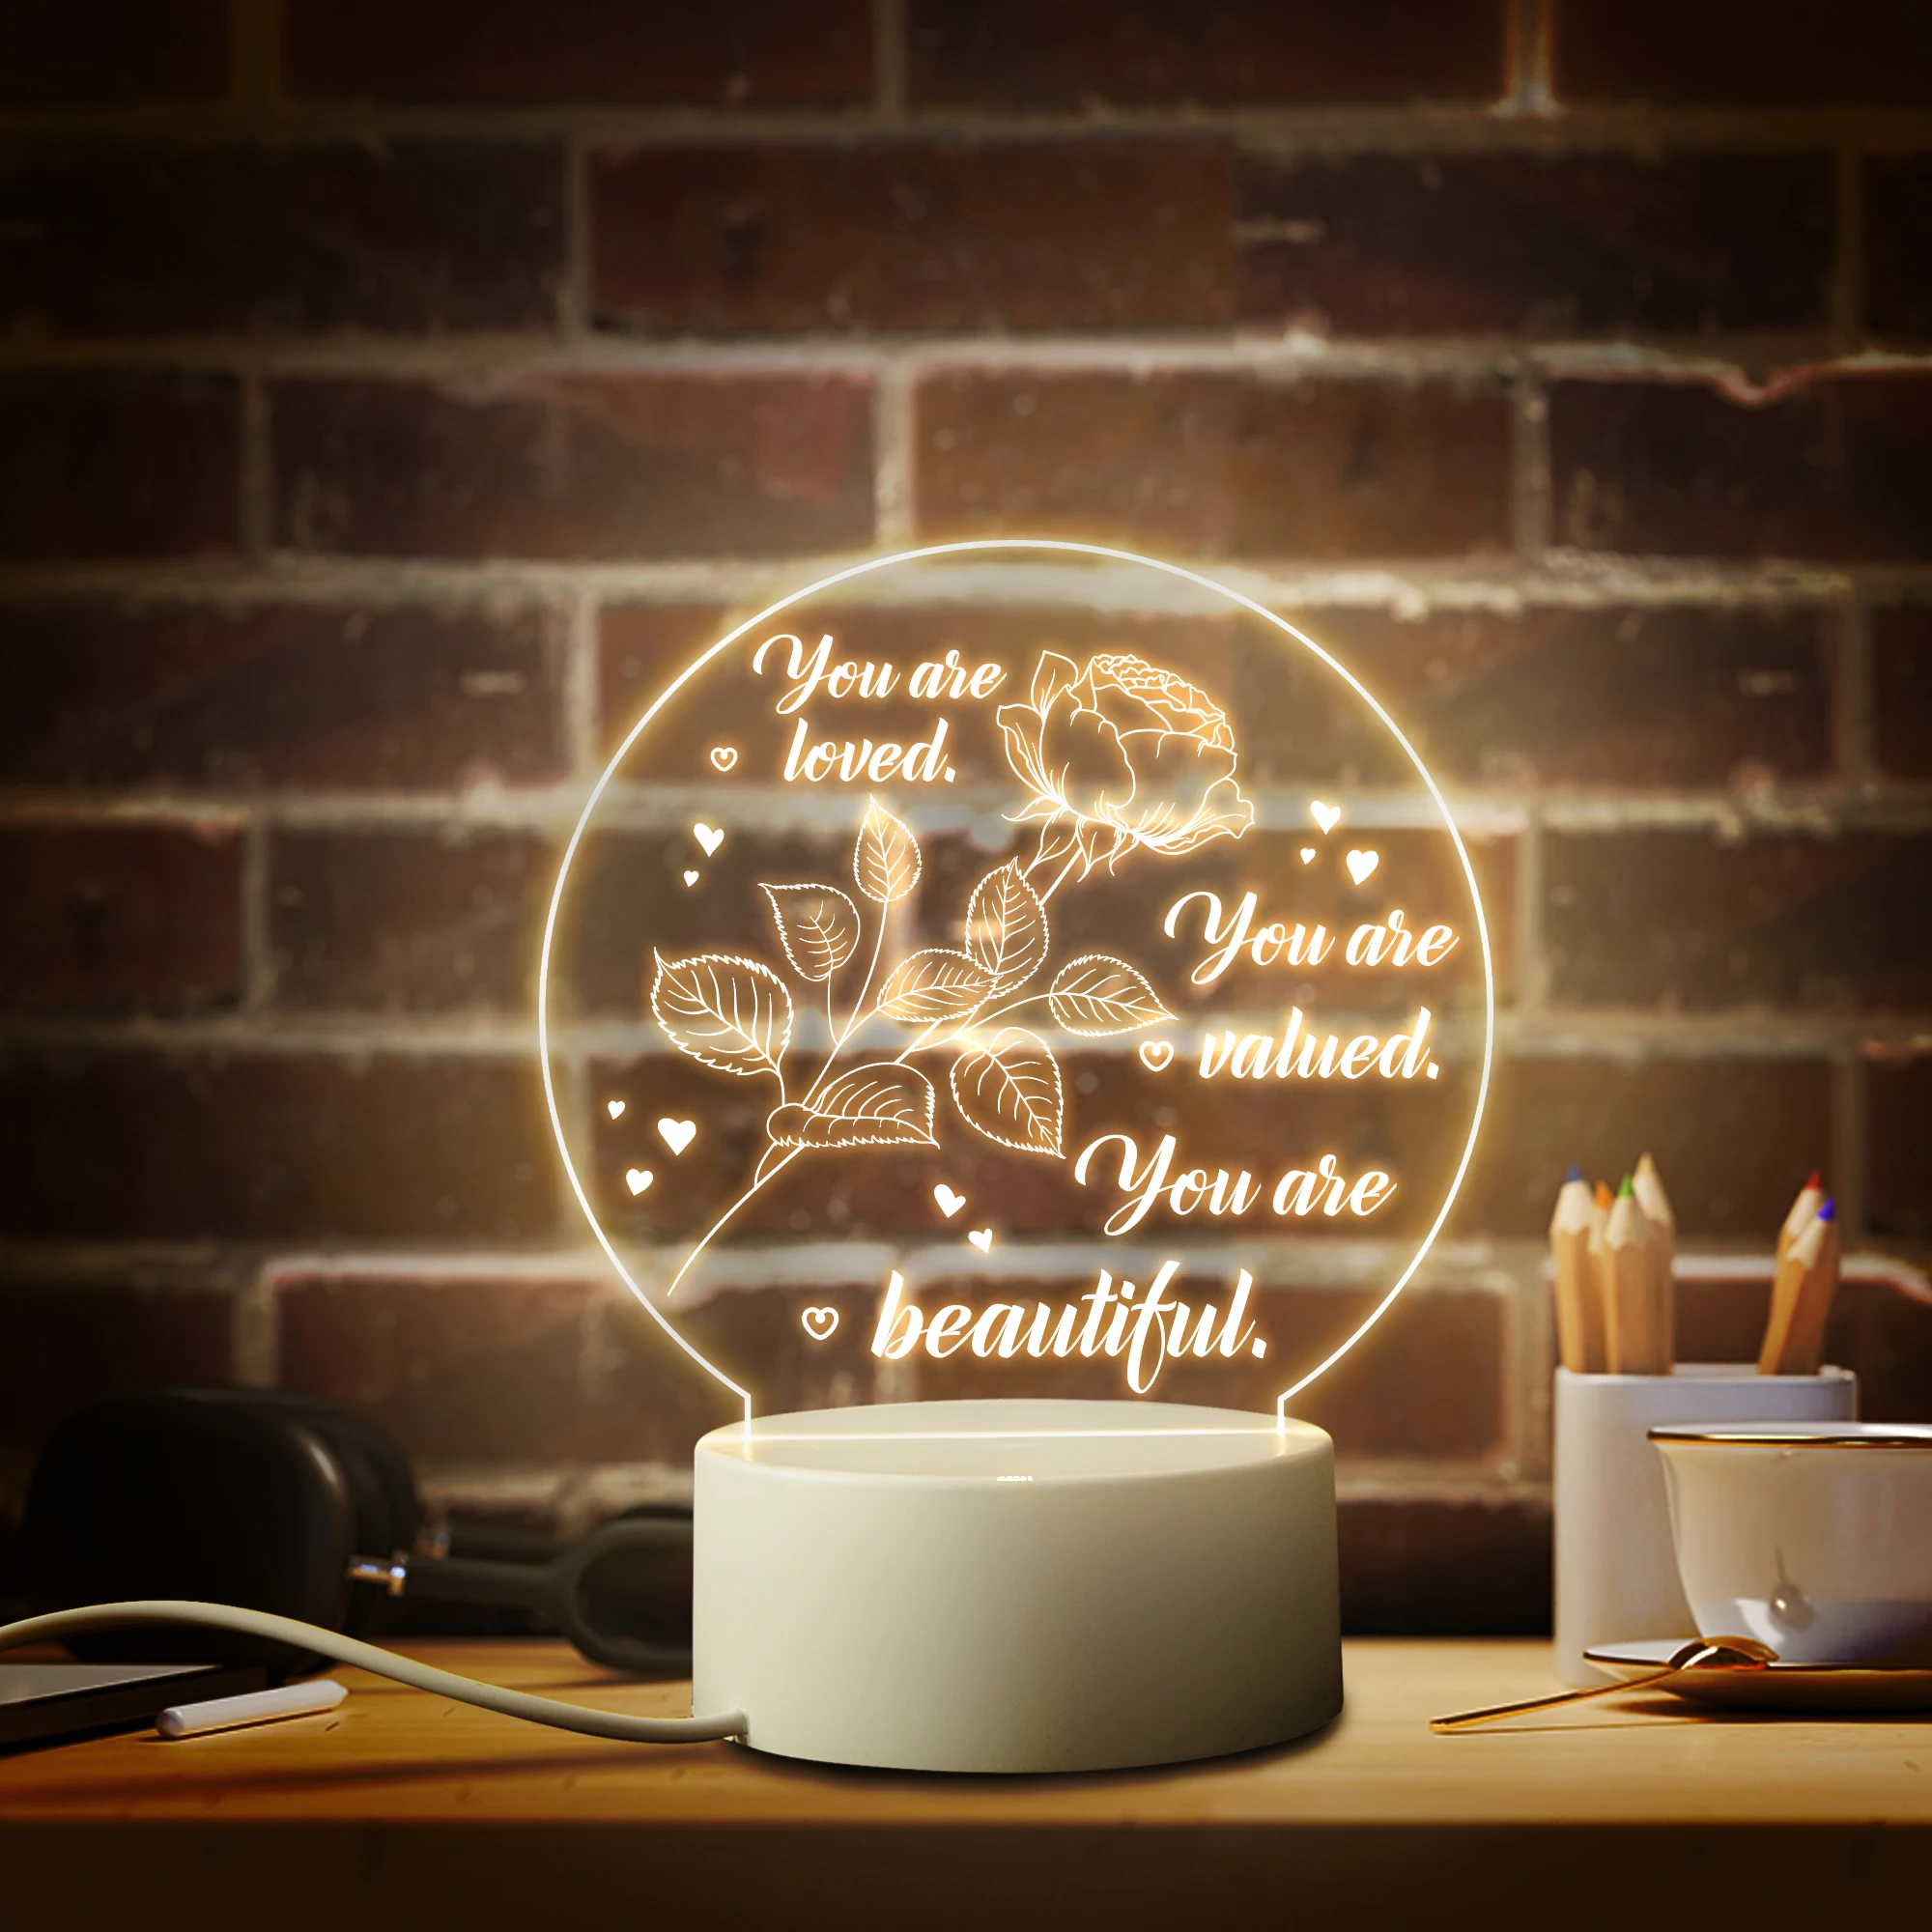 Surprised Night Light Gift for Daddy Mommy Personalized Birthday Holiday Present Fancy Lighting Family Bedroom Decorative  Lamp night light for bedroom